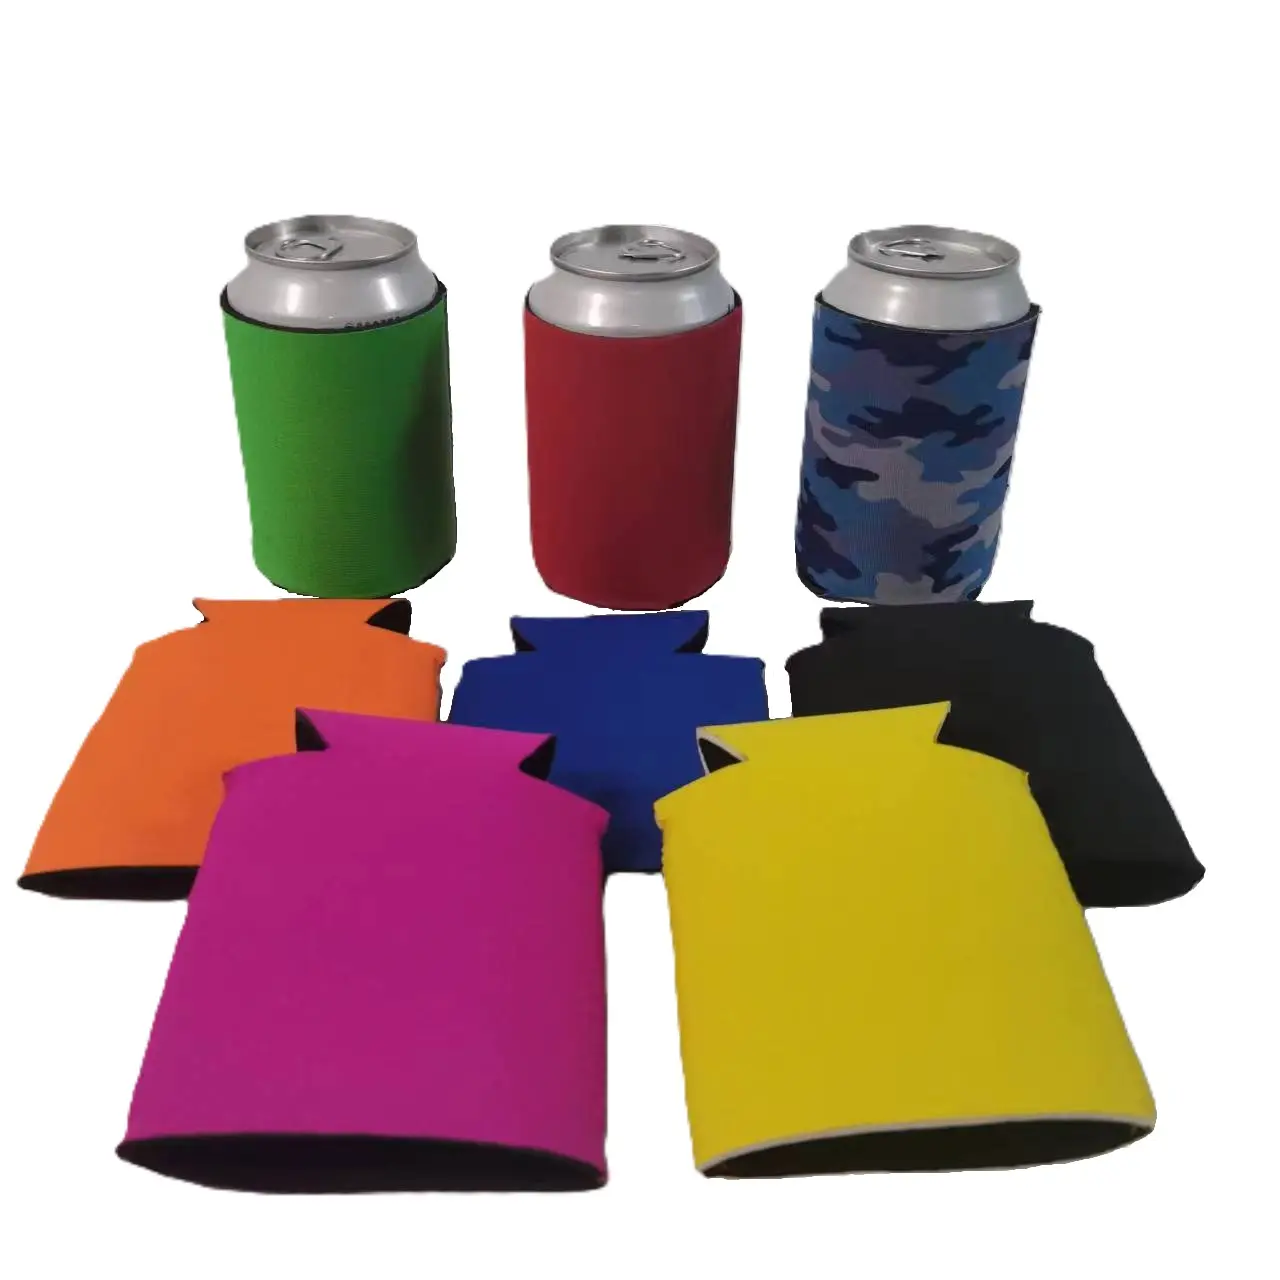 Custom Logo Neoprene Can Coolers Slim Beer Bottle Cooler with Waterproof Feature Coozy Drink Coozies Insulated Blank Slap Cans